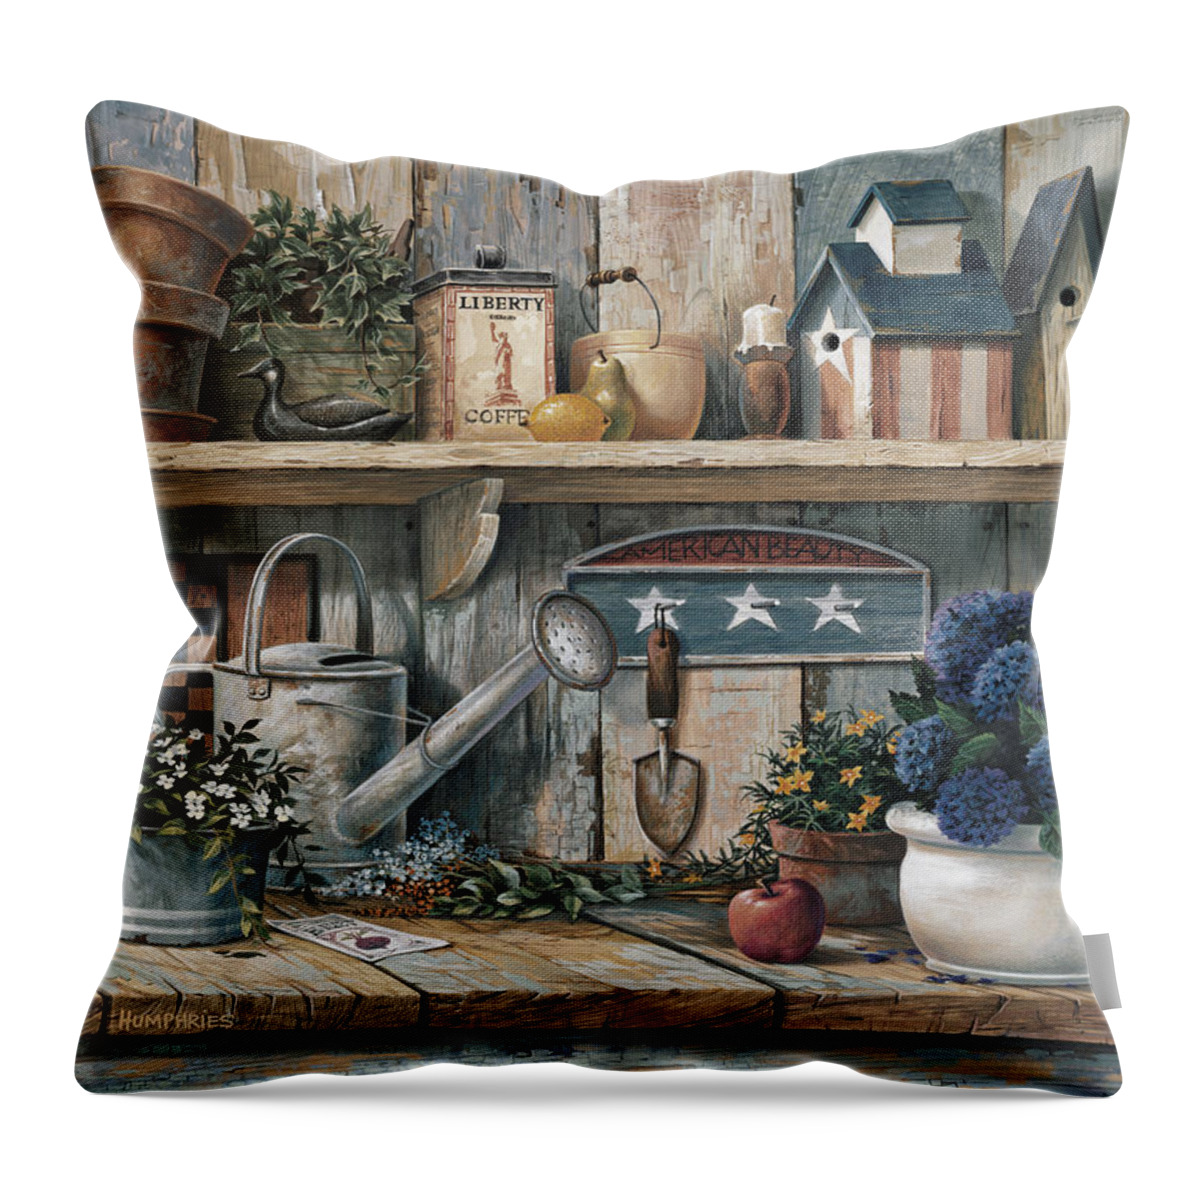 Michael Humphries Throw Pillow featuring the painting Rhapsody In Blue by Michael Humphries